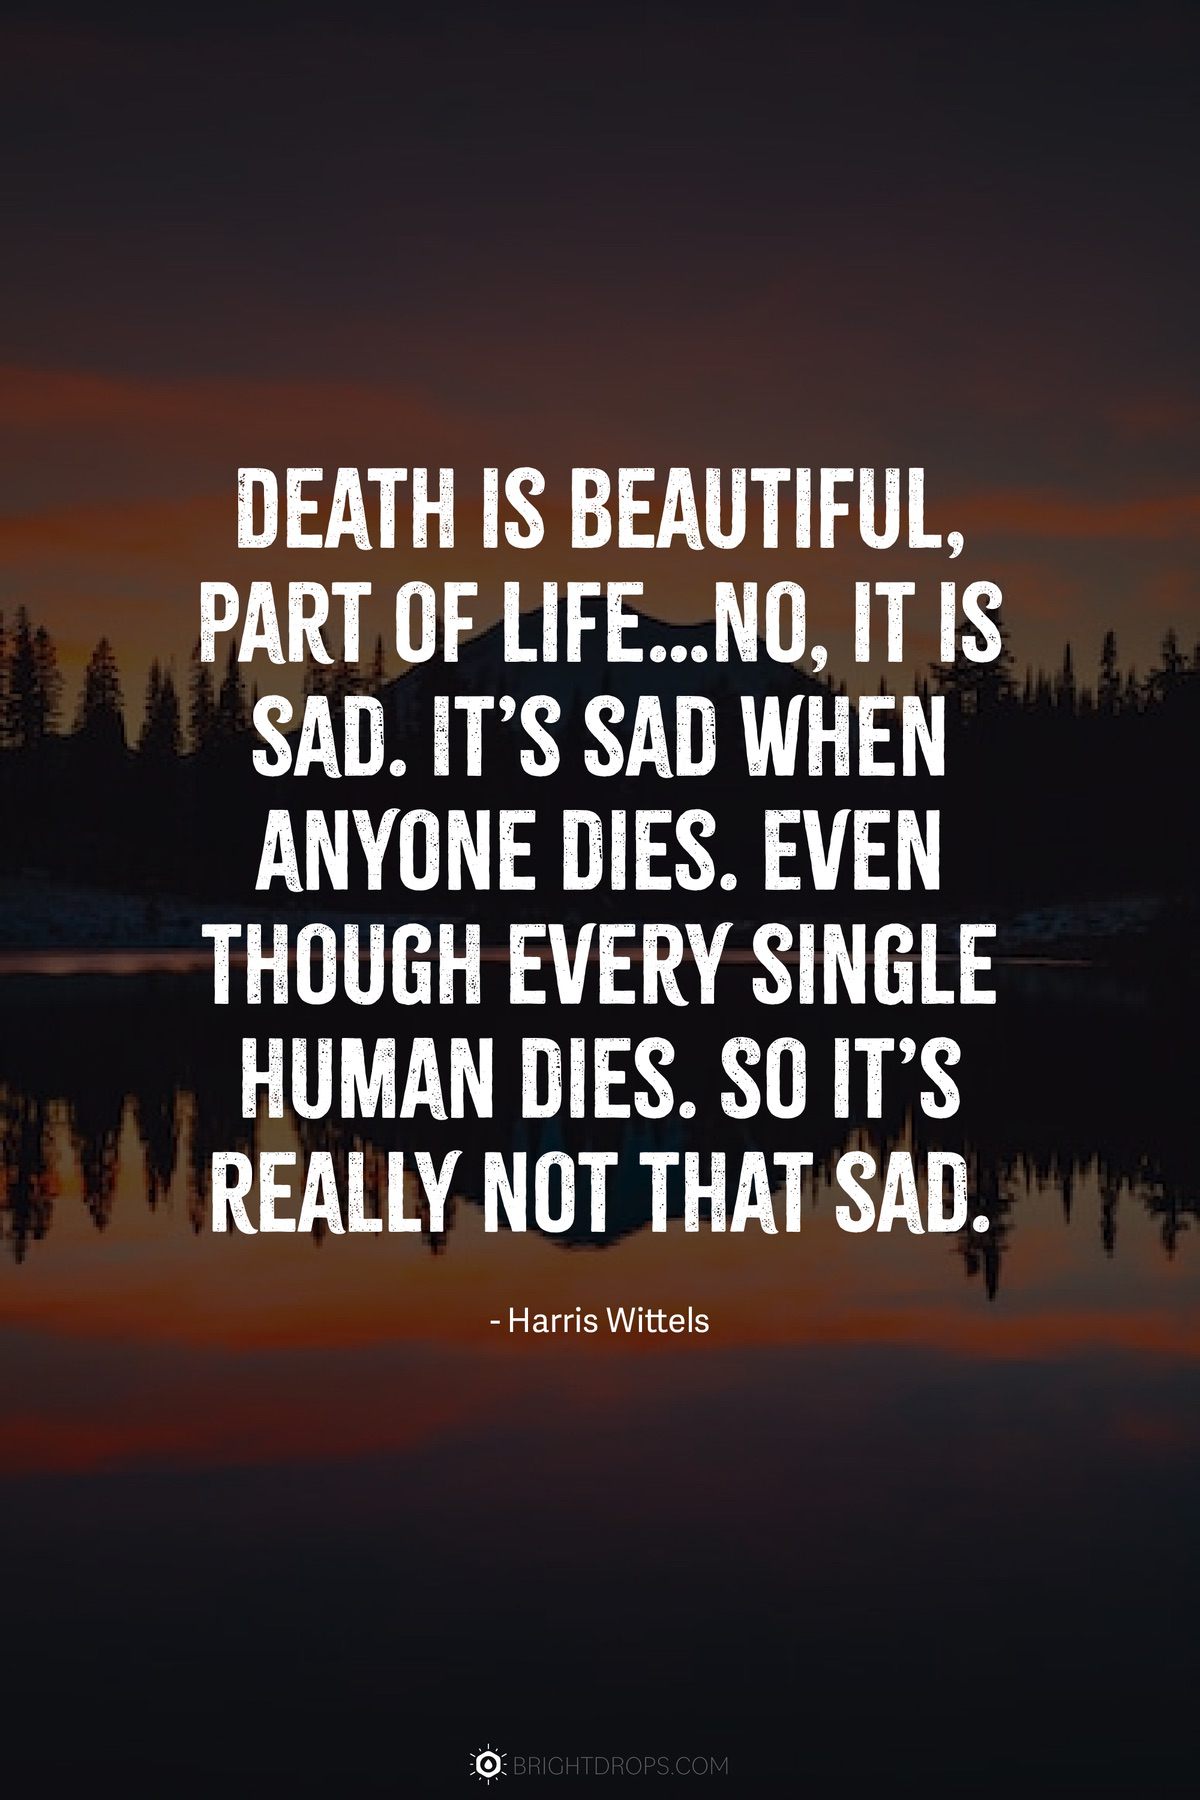 Death is beautiful, part of life…No, it is sad. It’s sad when anyone dies. Even though every single human dies. So it’s really not that sad.